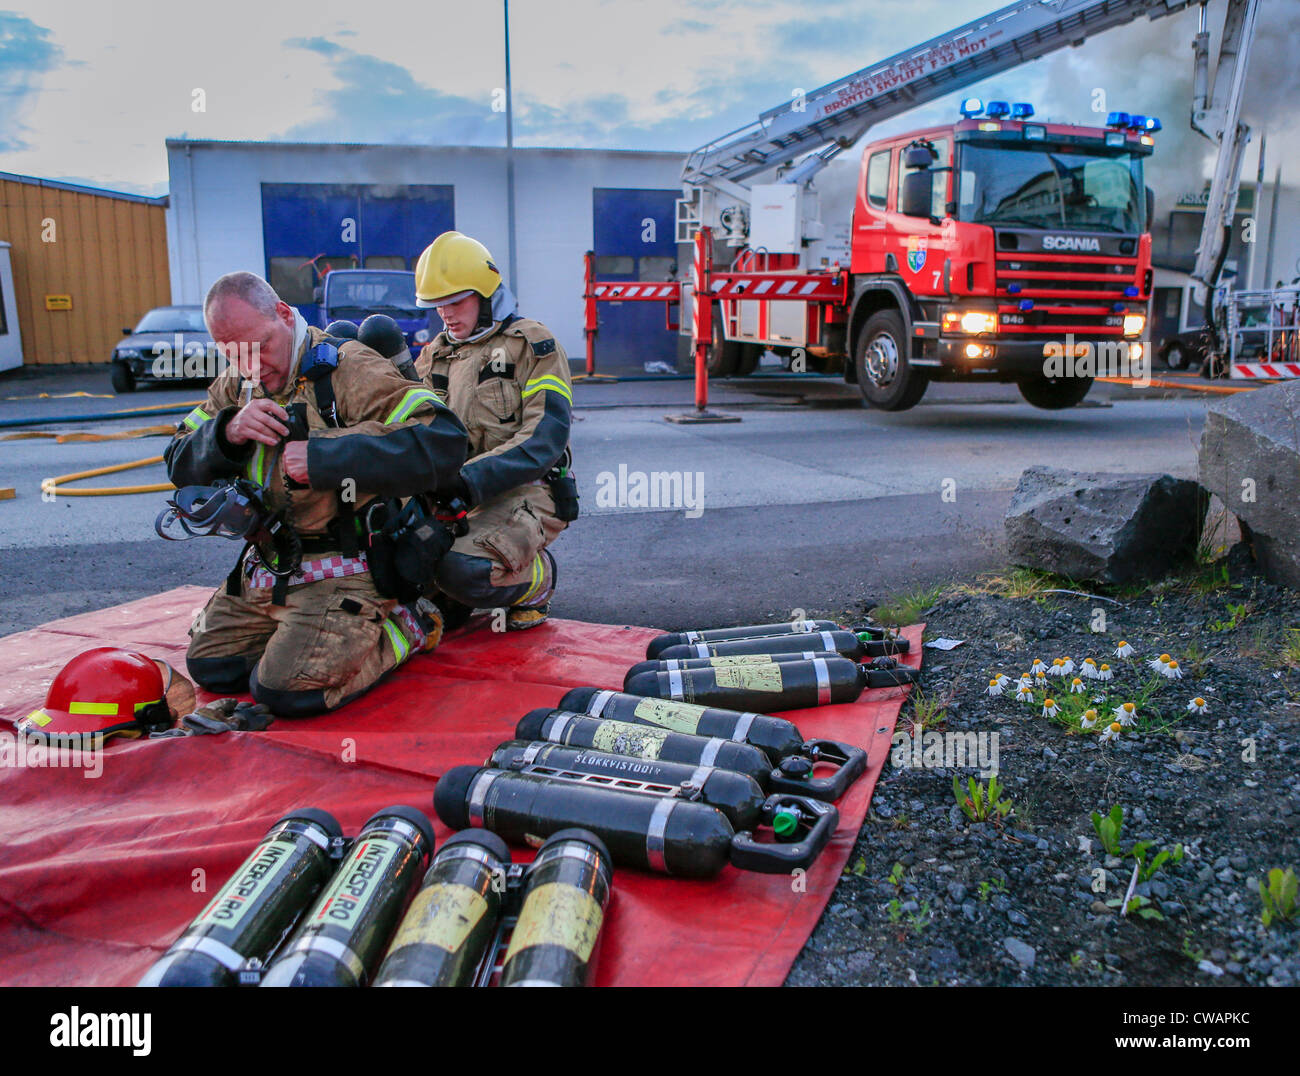 Firefighter assisting team member with oxygen tanks. Auto repair shop on fire in suburb of Reykjavik, Iceland Stock Photo